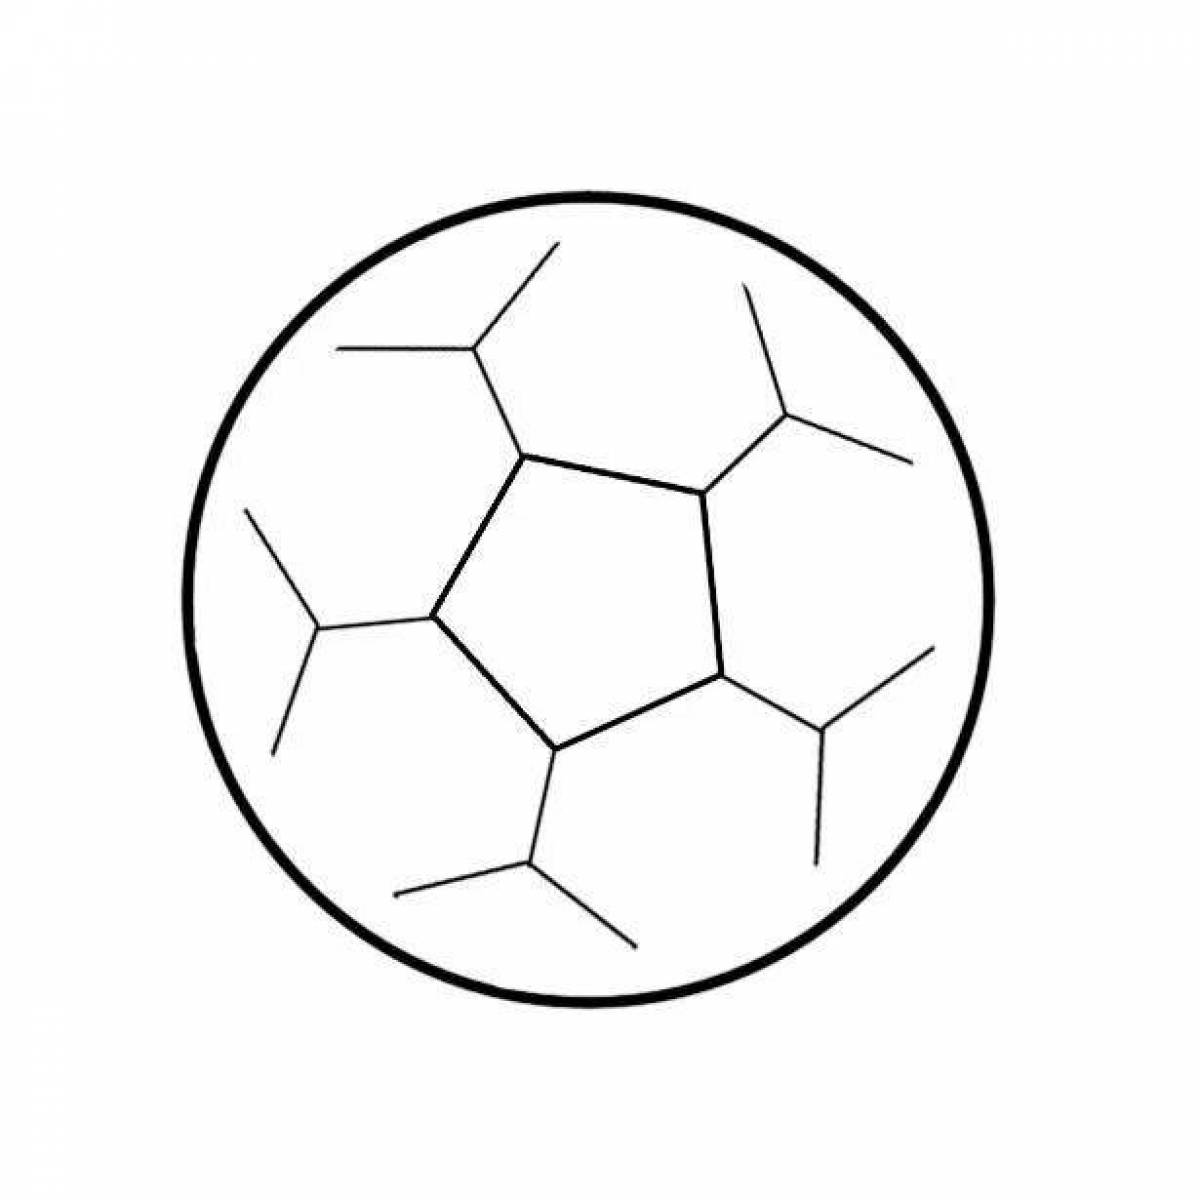 Adorable soccer ball coloring page for kids